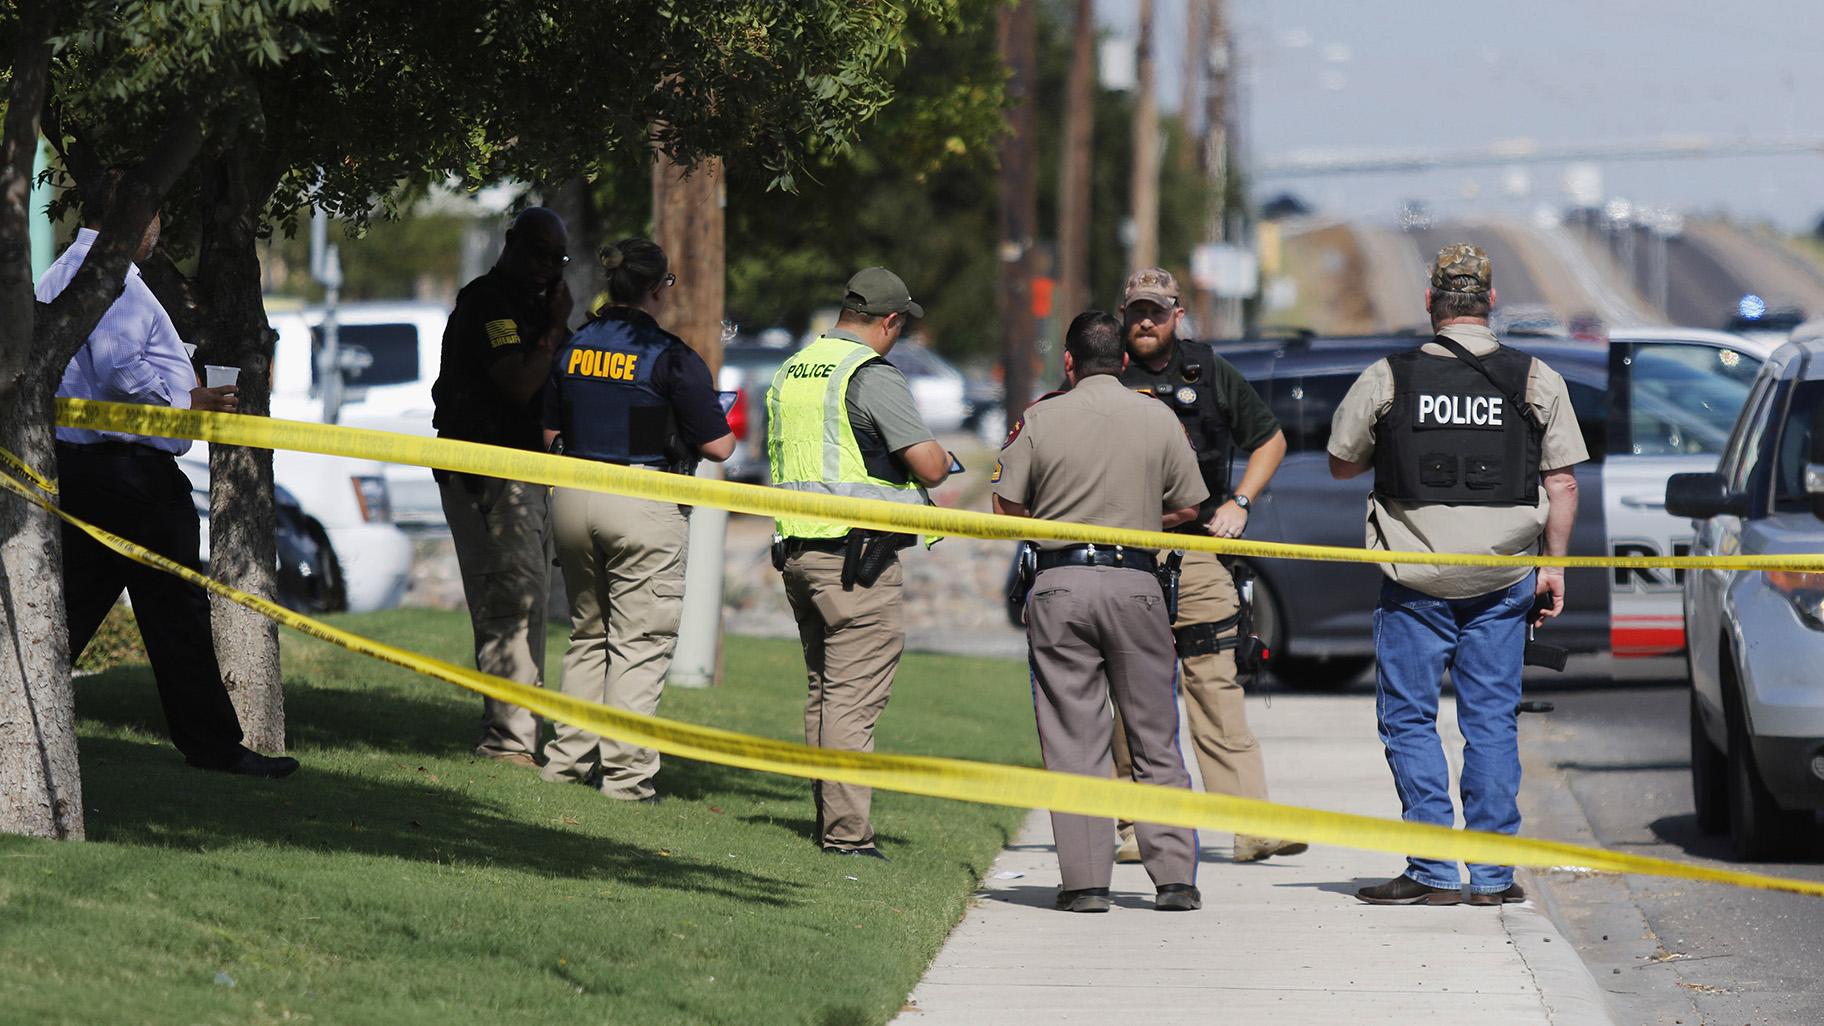 Authorities cordon off a part of the sidewalk in the 5100 block of E. 42nd Street in Odessa, Texas, Saturday, Aug. 31, 2019. Several people were dead after a gunman who hijacked a postal service vehicle in West Texas shot more than 20 people, authorities said Saturday. The gunman was killed and a few law enforcement officers were among the injured. (Mark Rogers / Odessa American via AP)